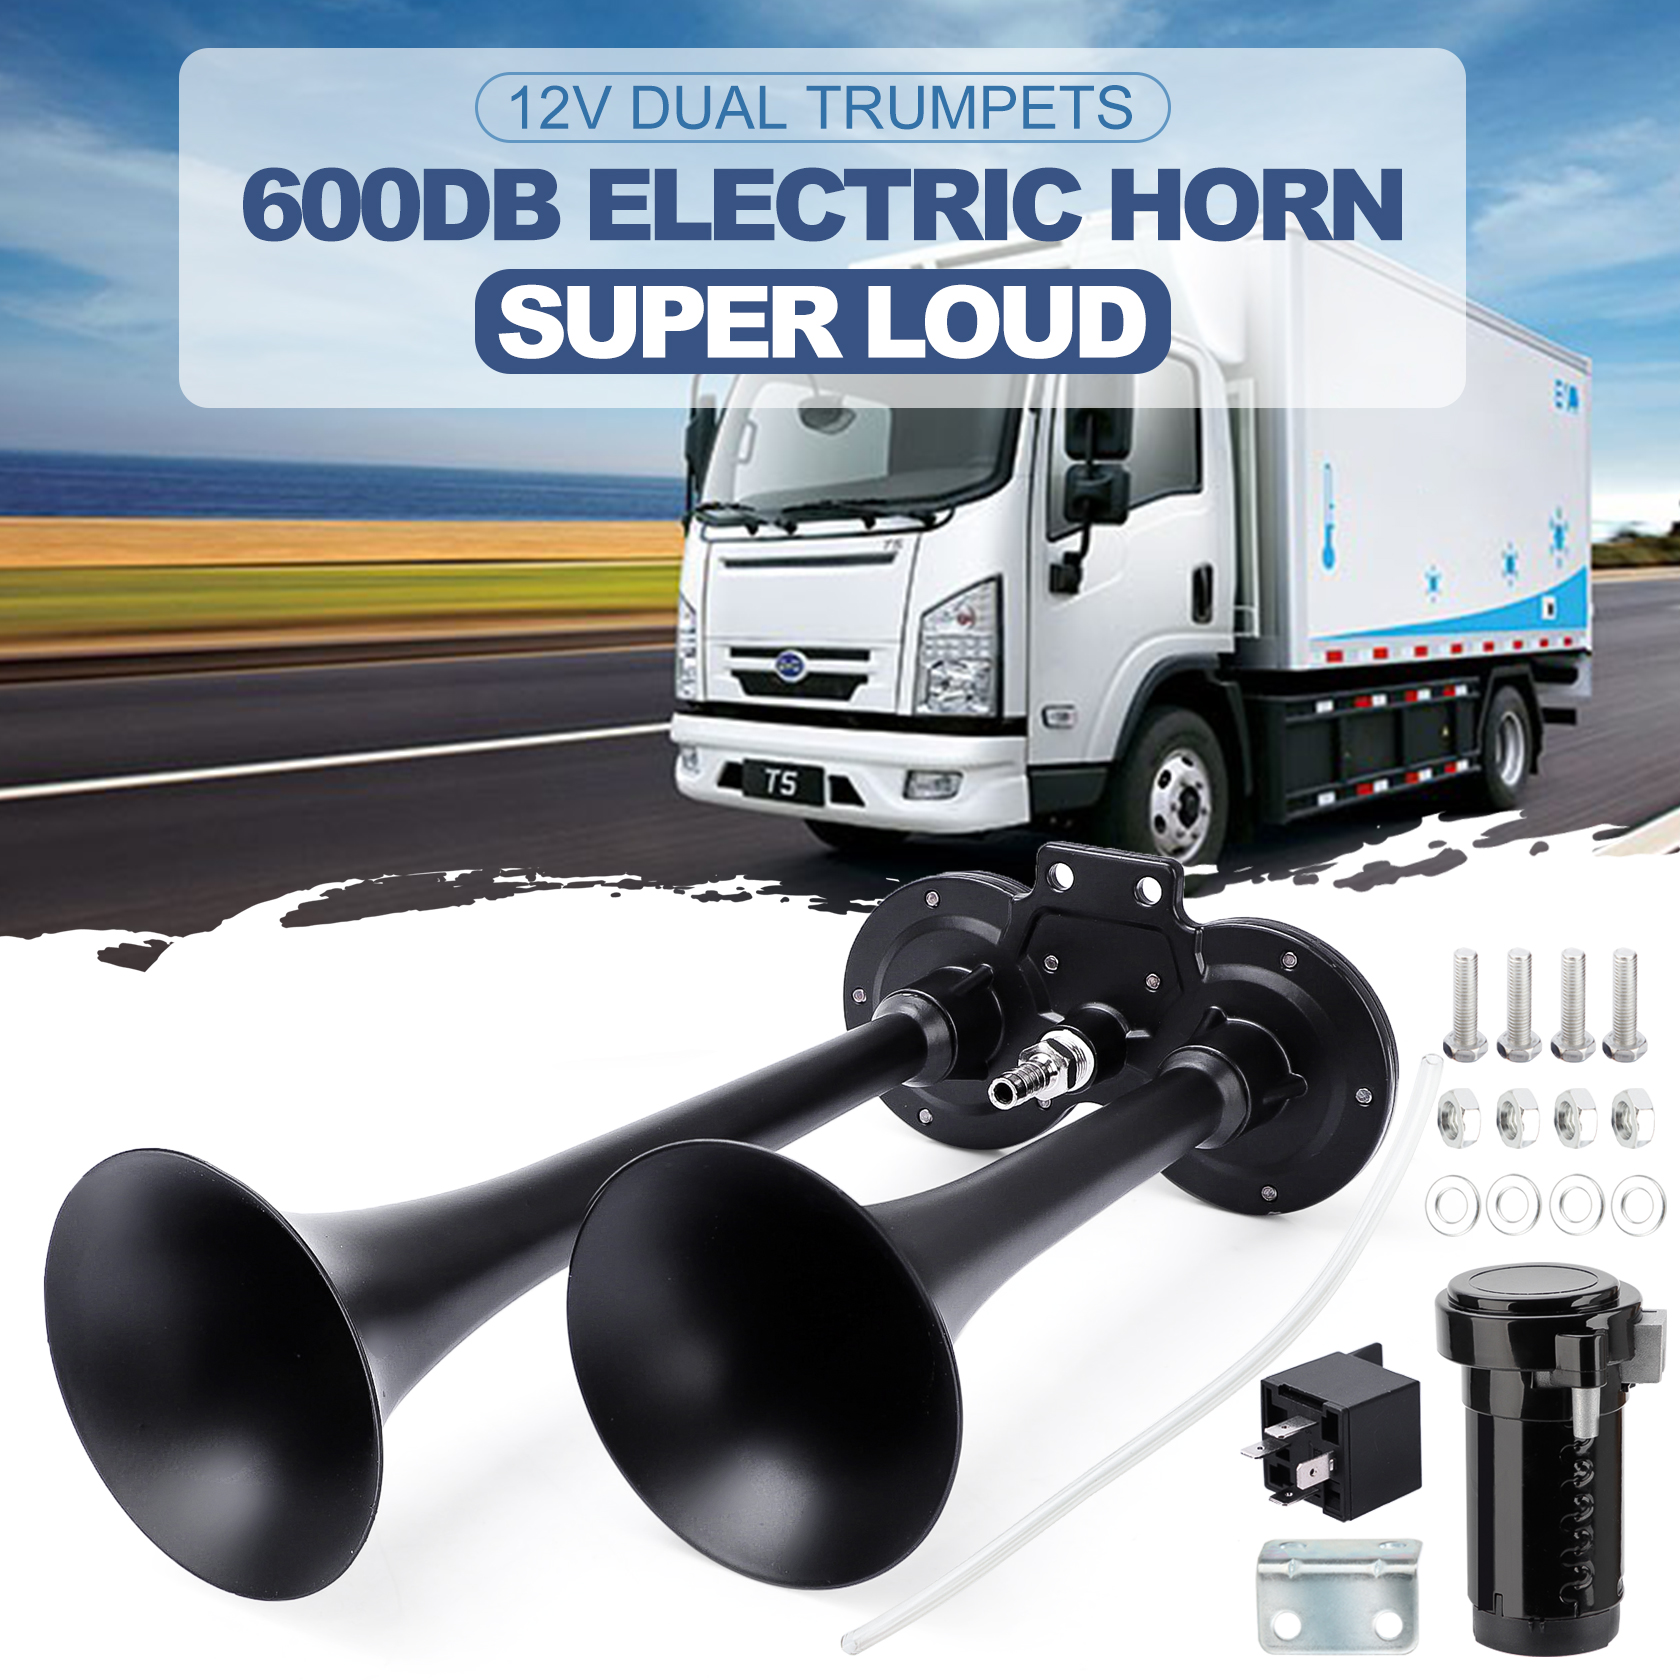 Carbole Train Horn Kit for Truck, 12V 600DB Loud Dual Trumpet Air Horn Kit  for Car and Truck